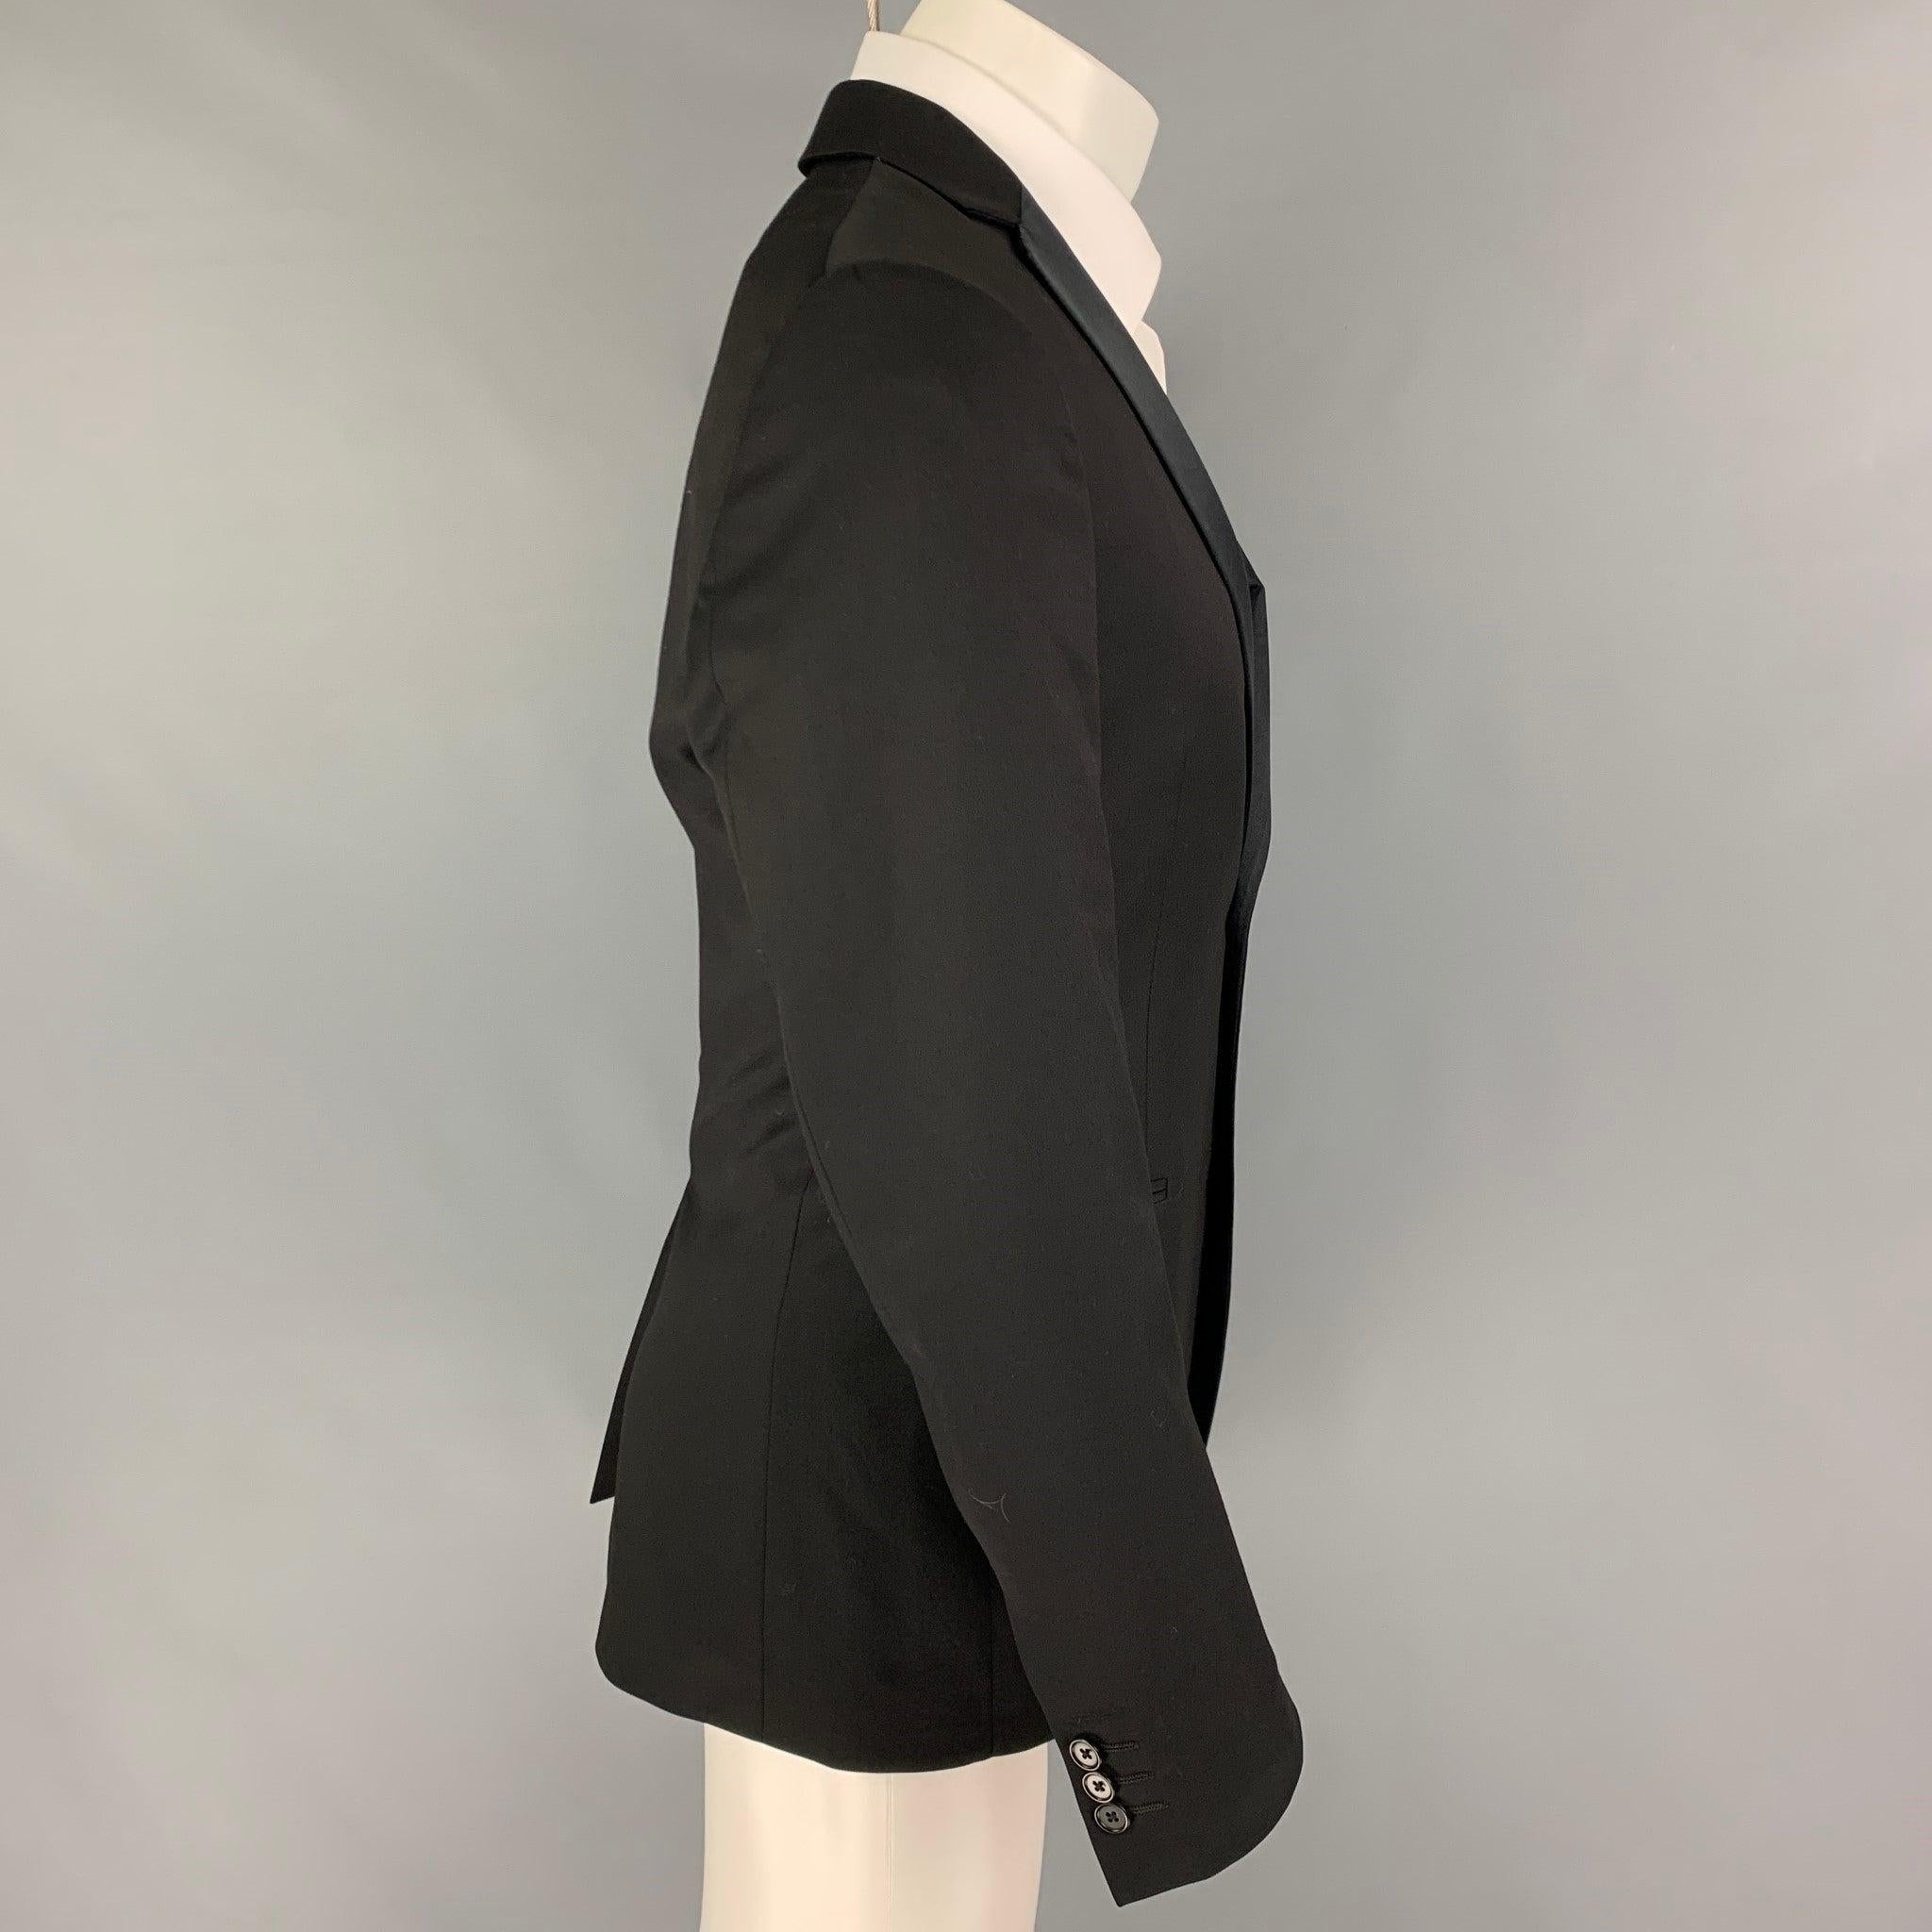 JOHN VARVATOS sport coat comes in a black wool with a full liner featuring a notch lapel, slit pockets, single back vent, and a double button closure. Made in Italy.
Very Good
Pre-Owned Condition. 

Marked:   46 

Measurements: 
 
Shoulder: 17